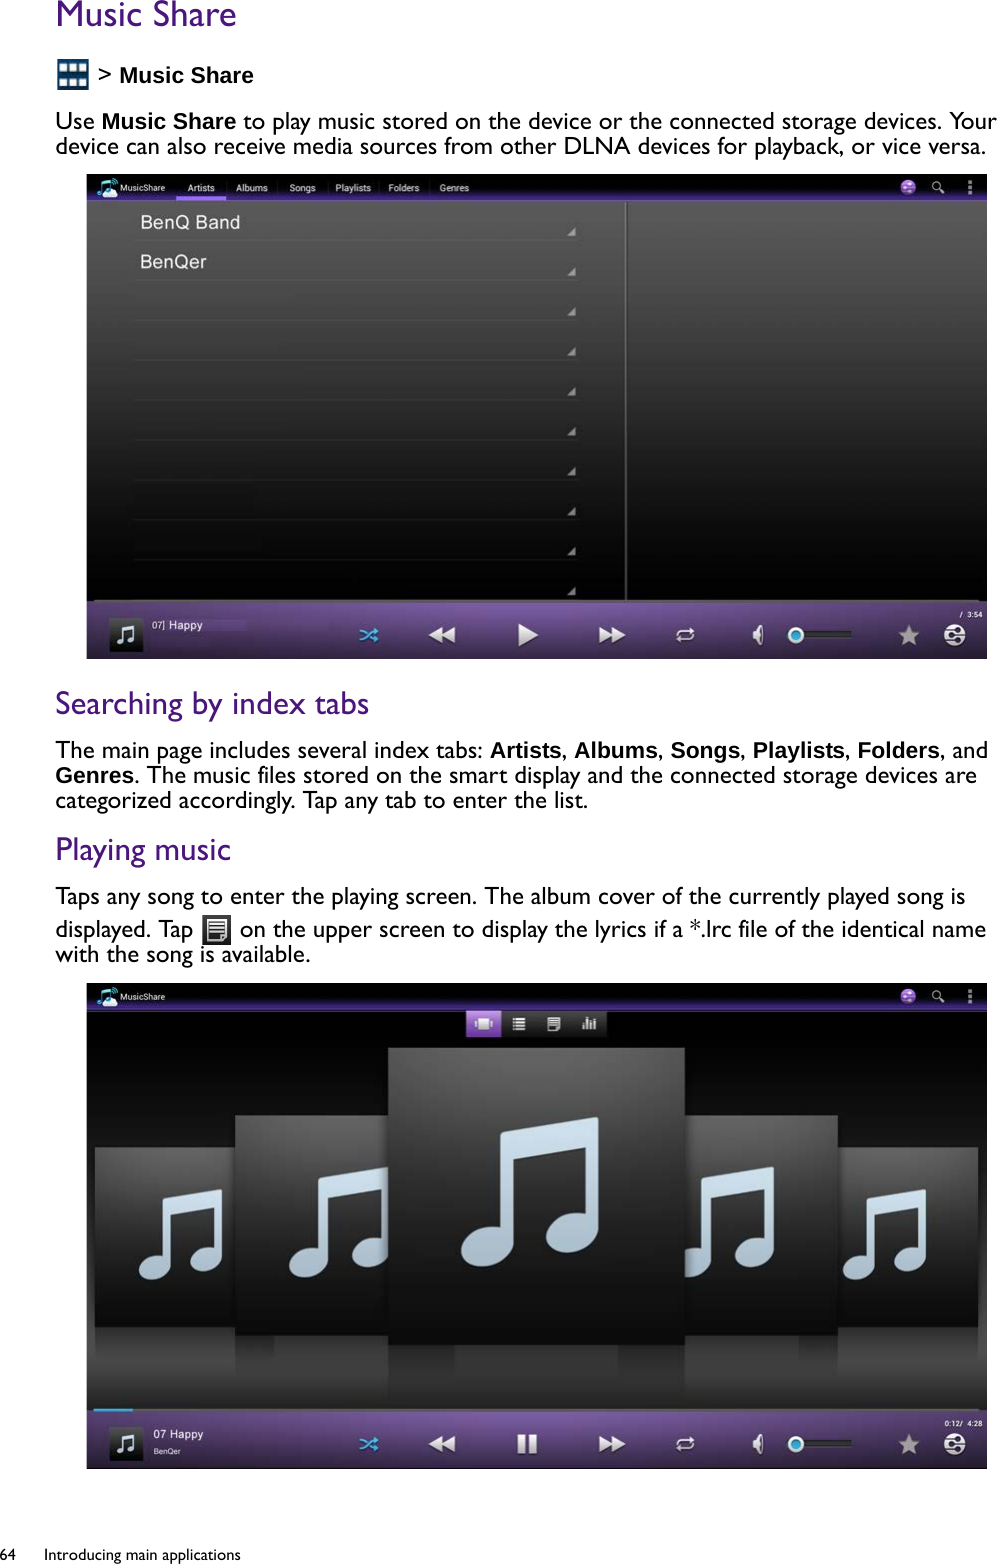 64  Introducing main applications  Music Share &gt; Music ShareUse Music Share to play music stored on the device or the connected storage devices. Your device can also receive media sources from other DLNA devices for playback, or vice versa.Searching by index tabsThe main page includes several index tabs: Artists, Albums, Songs, Playlists, Folders, and Genres. The music files stored on the smart display and the connected storage devices are categorized accordingly. Tap any tab to enter the list.Playing musicTaps any song to enter the playing screen. The album cover of the currently played song is displayed. Tap   on the upper screen to display the lyrics if a *.lrc file of the identical name with the song is available.